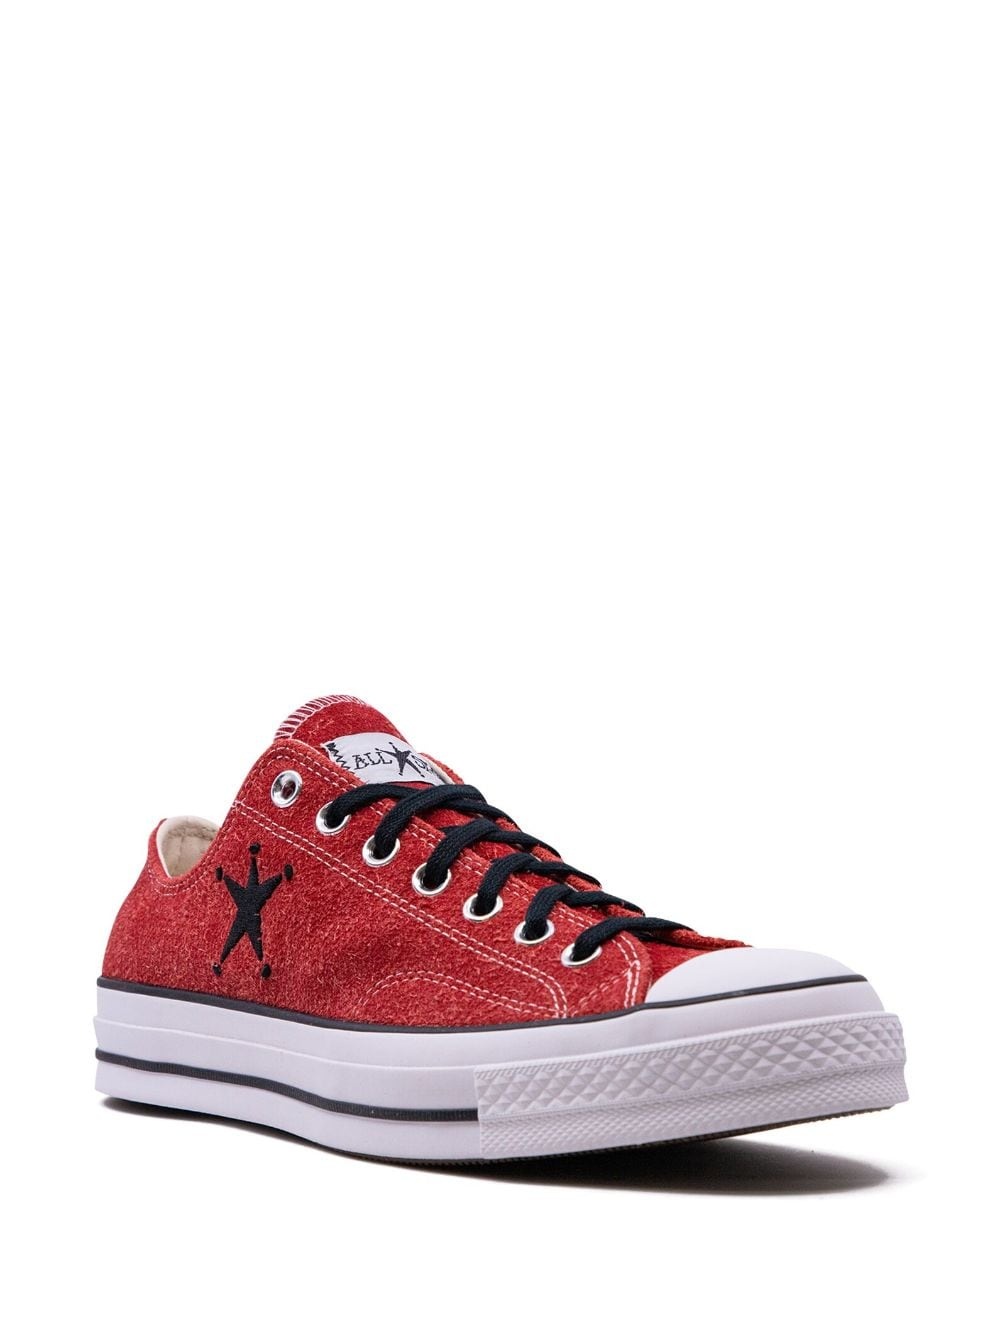 x Stussy Chuck 70 "Poppy Red" sneakers - 2